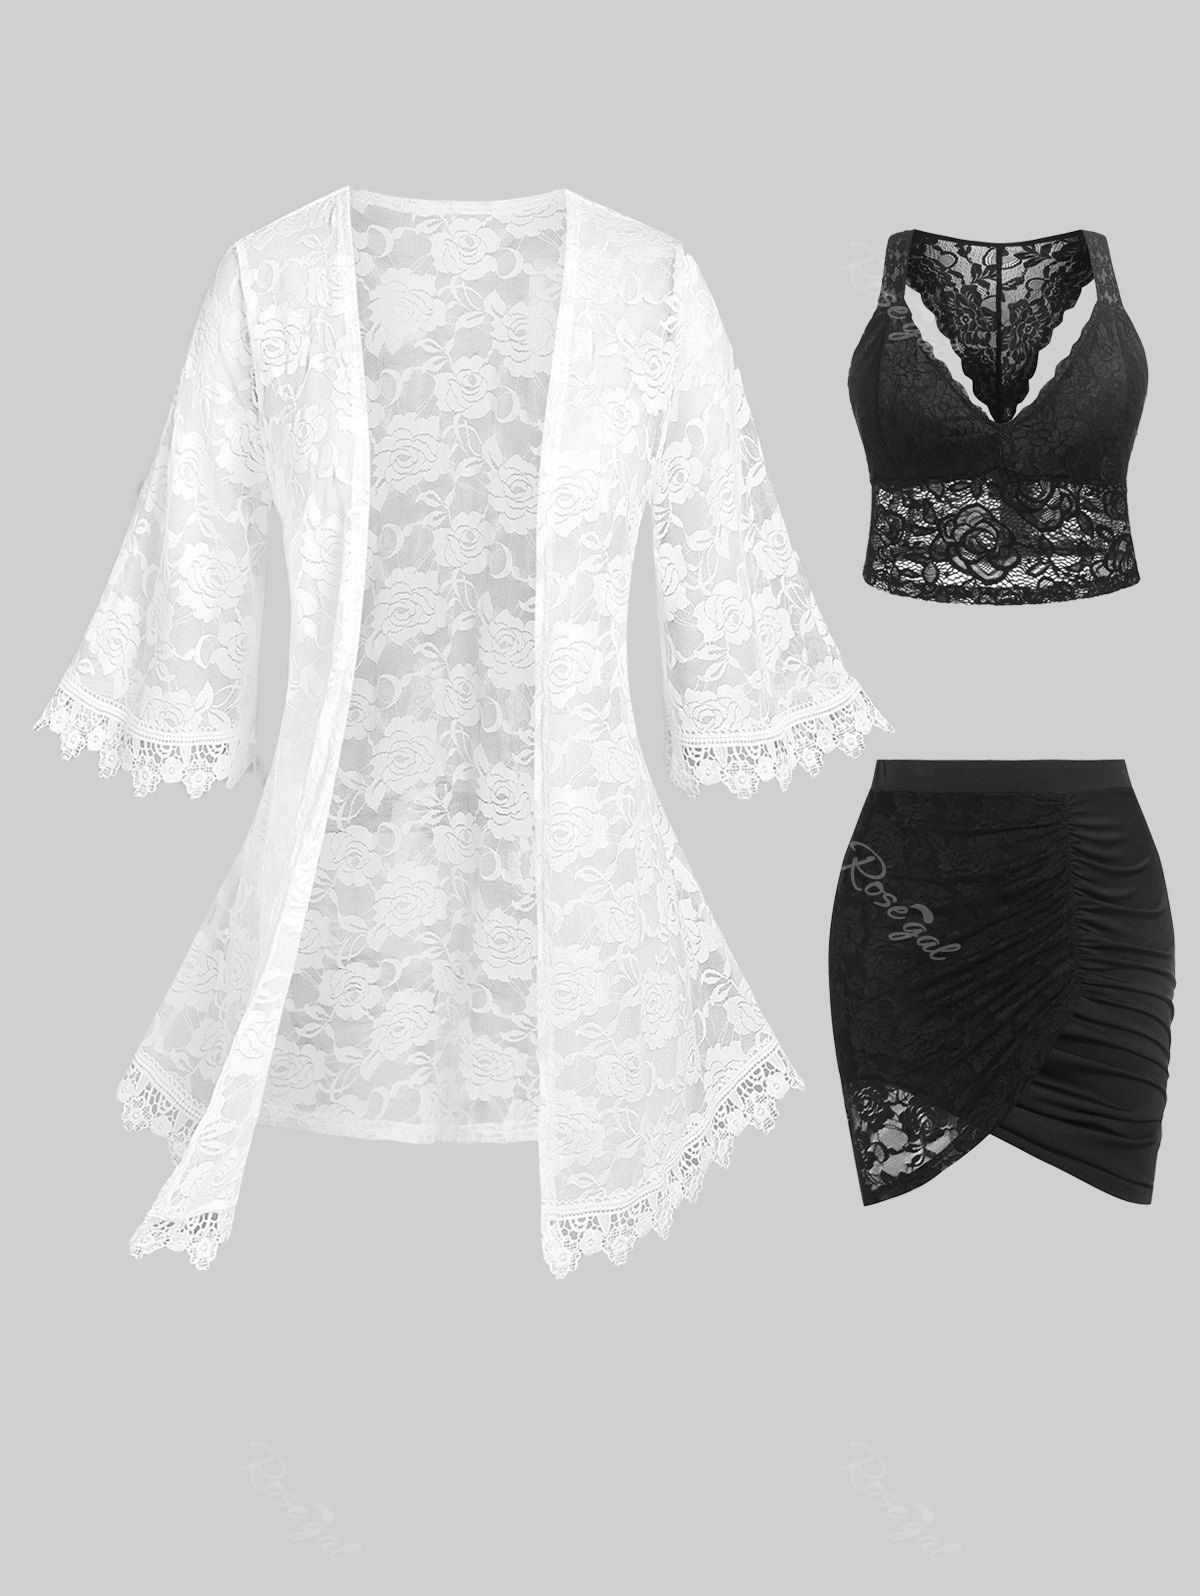 Trendy Monochrome Lace Sheer Tunic Cardigan and Tulip Mini Skirt Plus Size Summer Outfit  